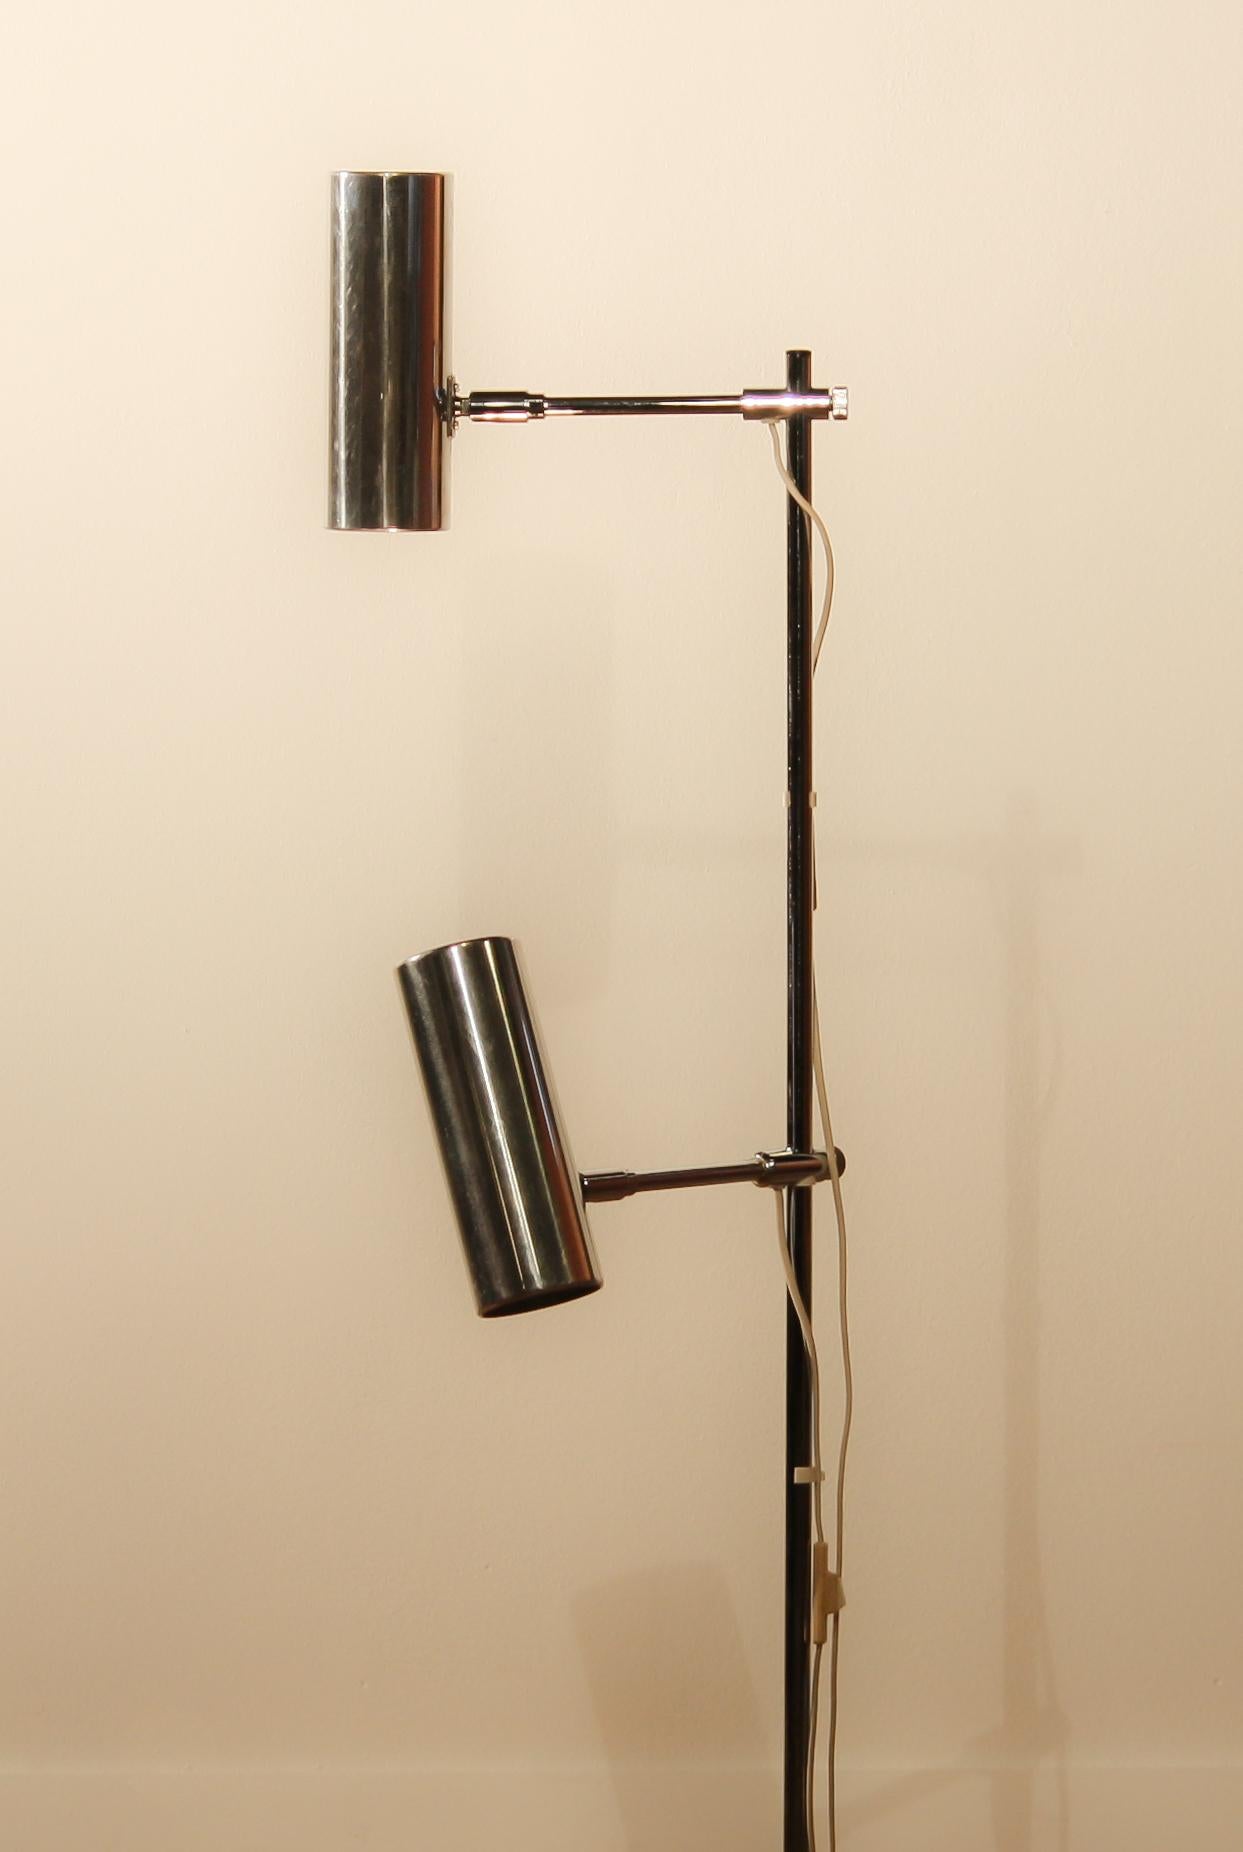 Beautiful floor lamp made by Bergboms scan light AB, Sweden.
This lamp has two-light.
The lampshades are made of aluminum and the stand is made of chromed steel.
It is in a nice working condition.
Period: 1960s.
Dimensions: H 112 cm, Ø 23